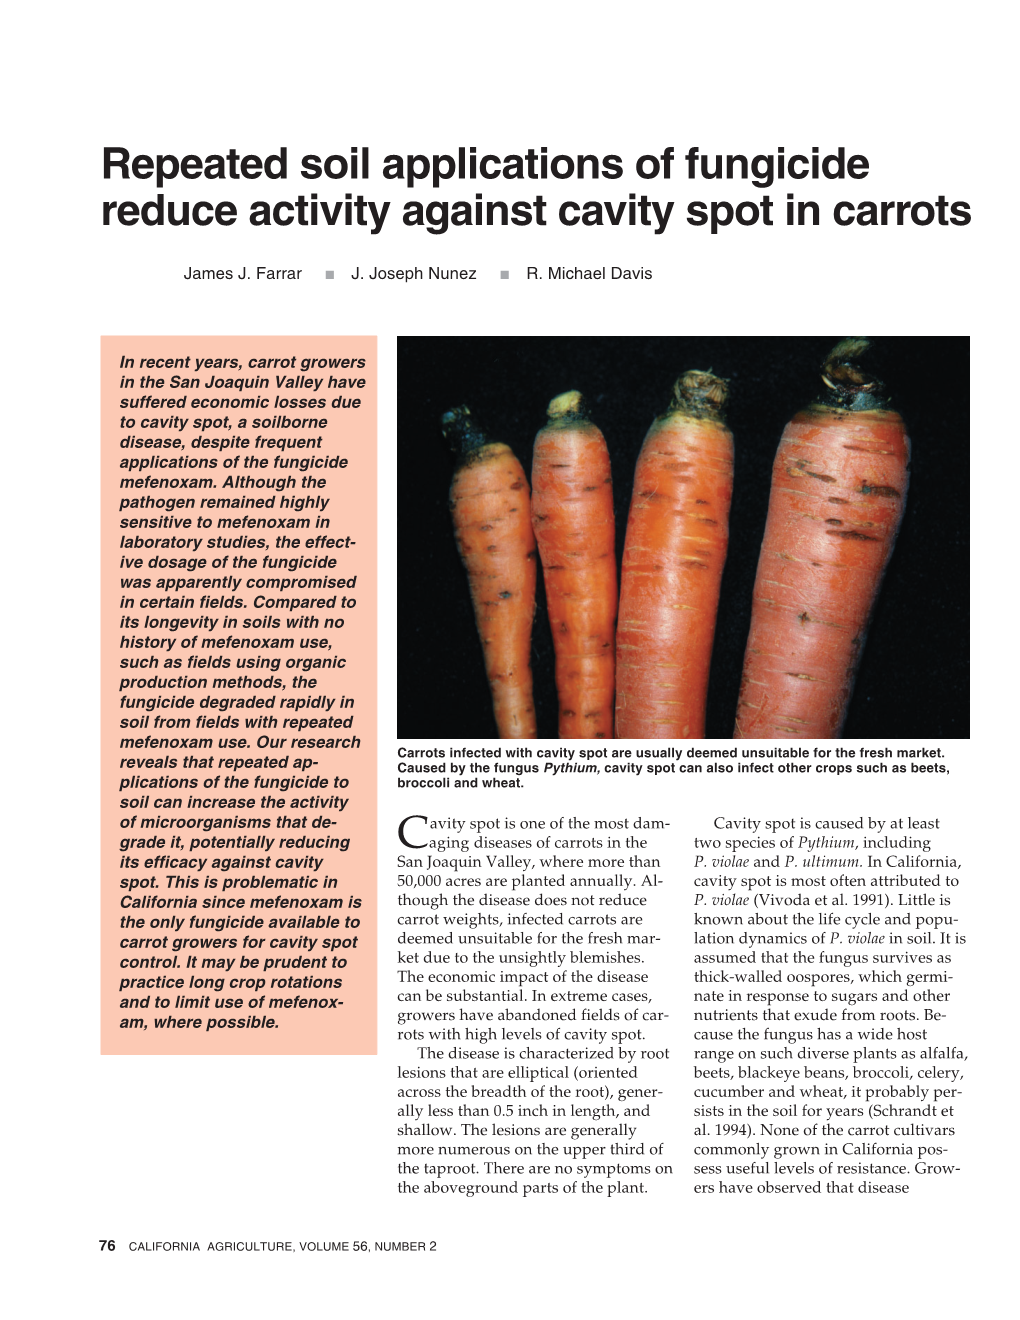 Repeated Soil Applications of Fungicide Reduce Activity Against Cavity Spot in Carrots